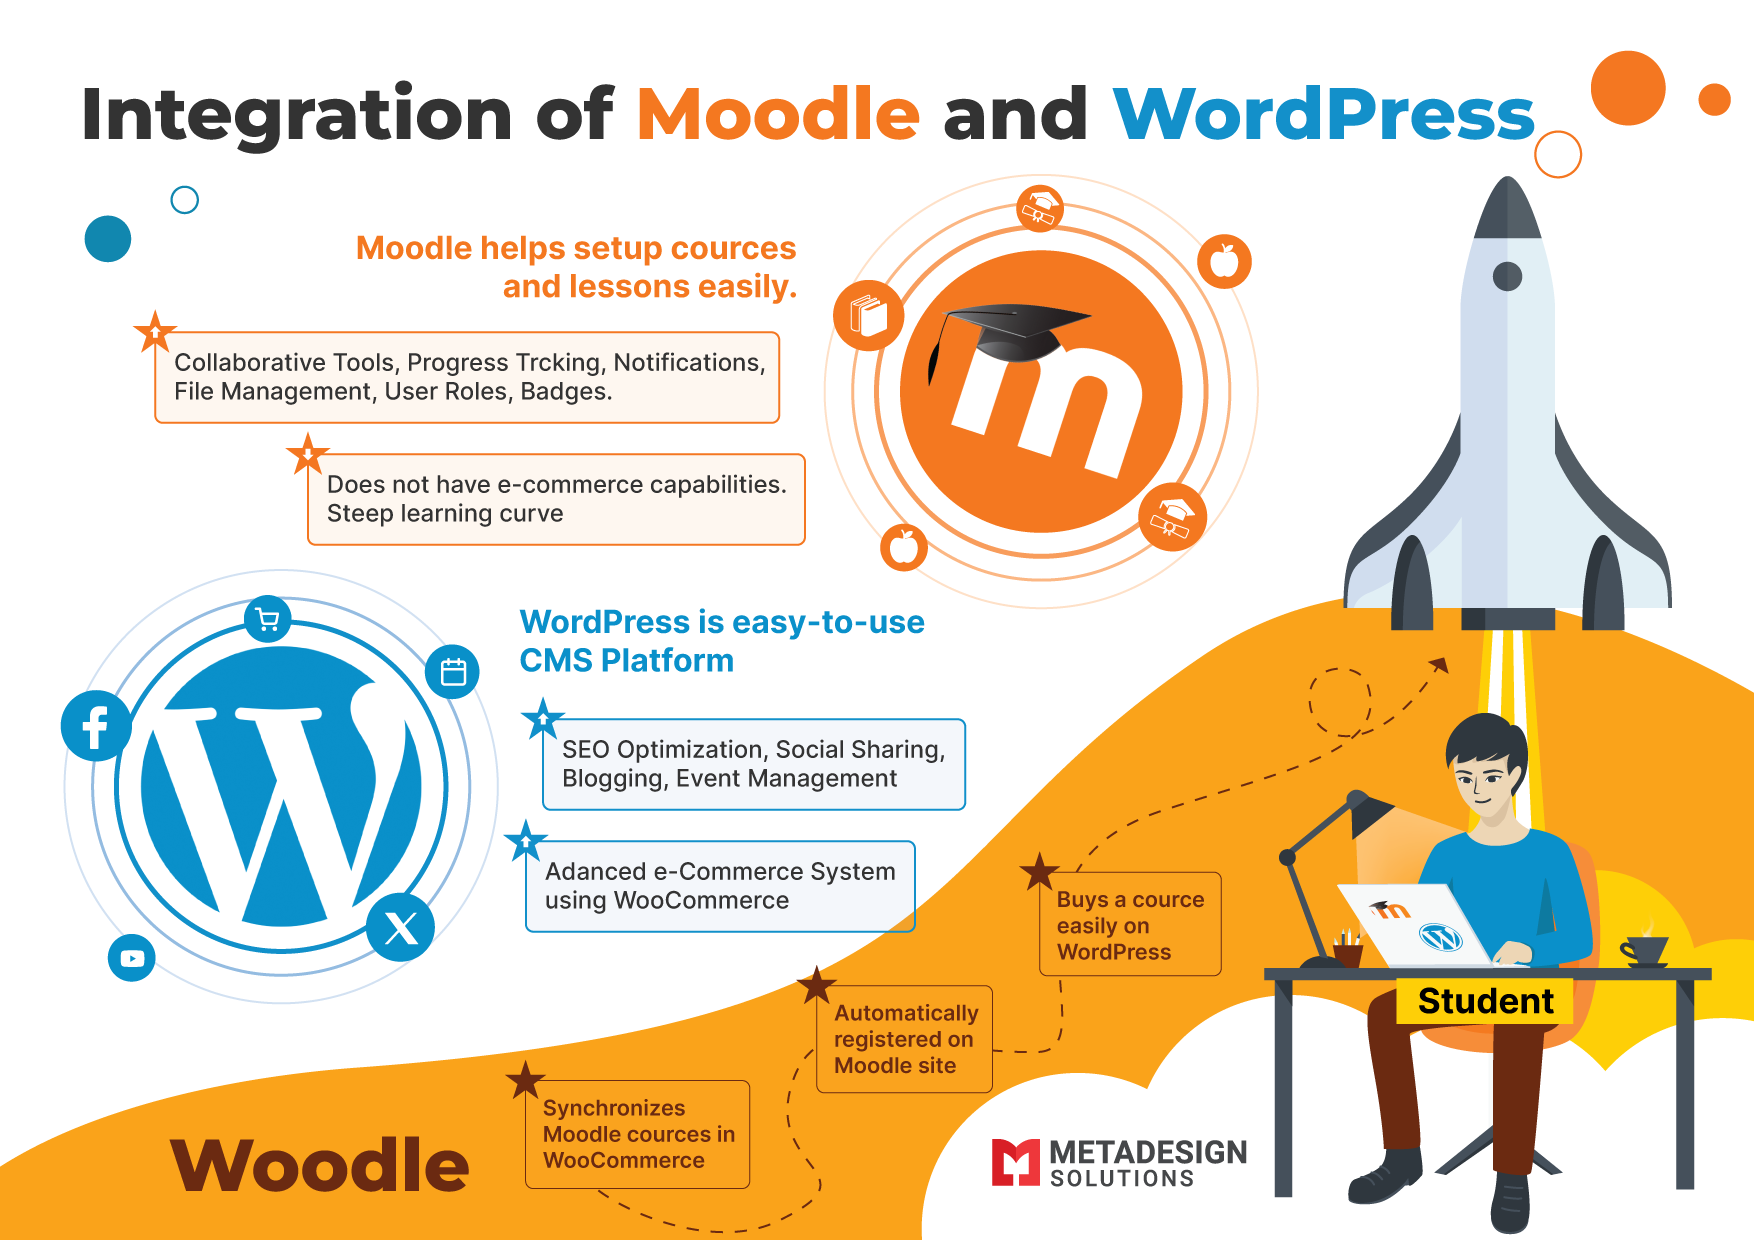 Integrating Moodle and WordPress for a Seamless Learning Experience